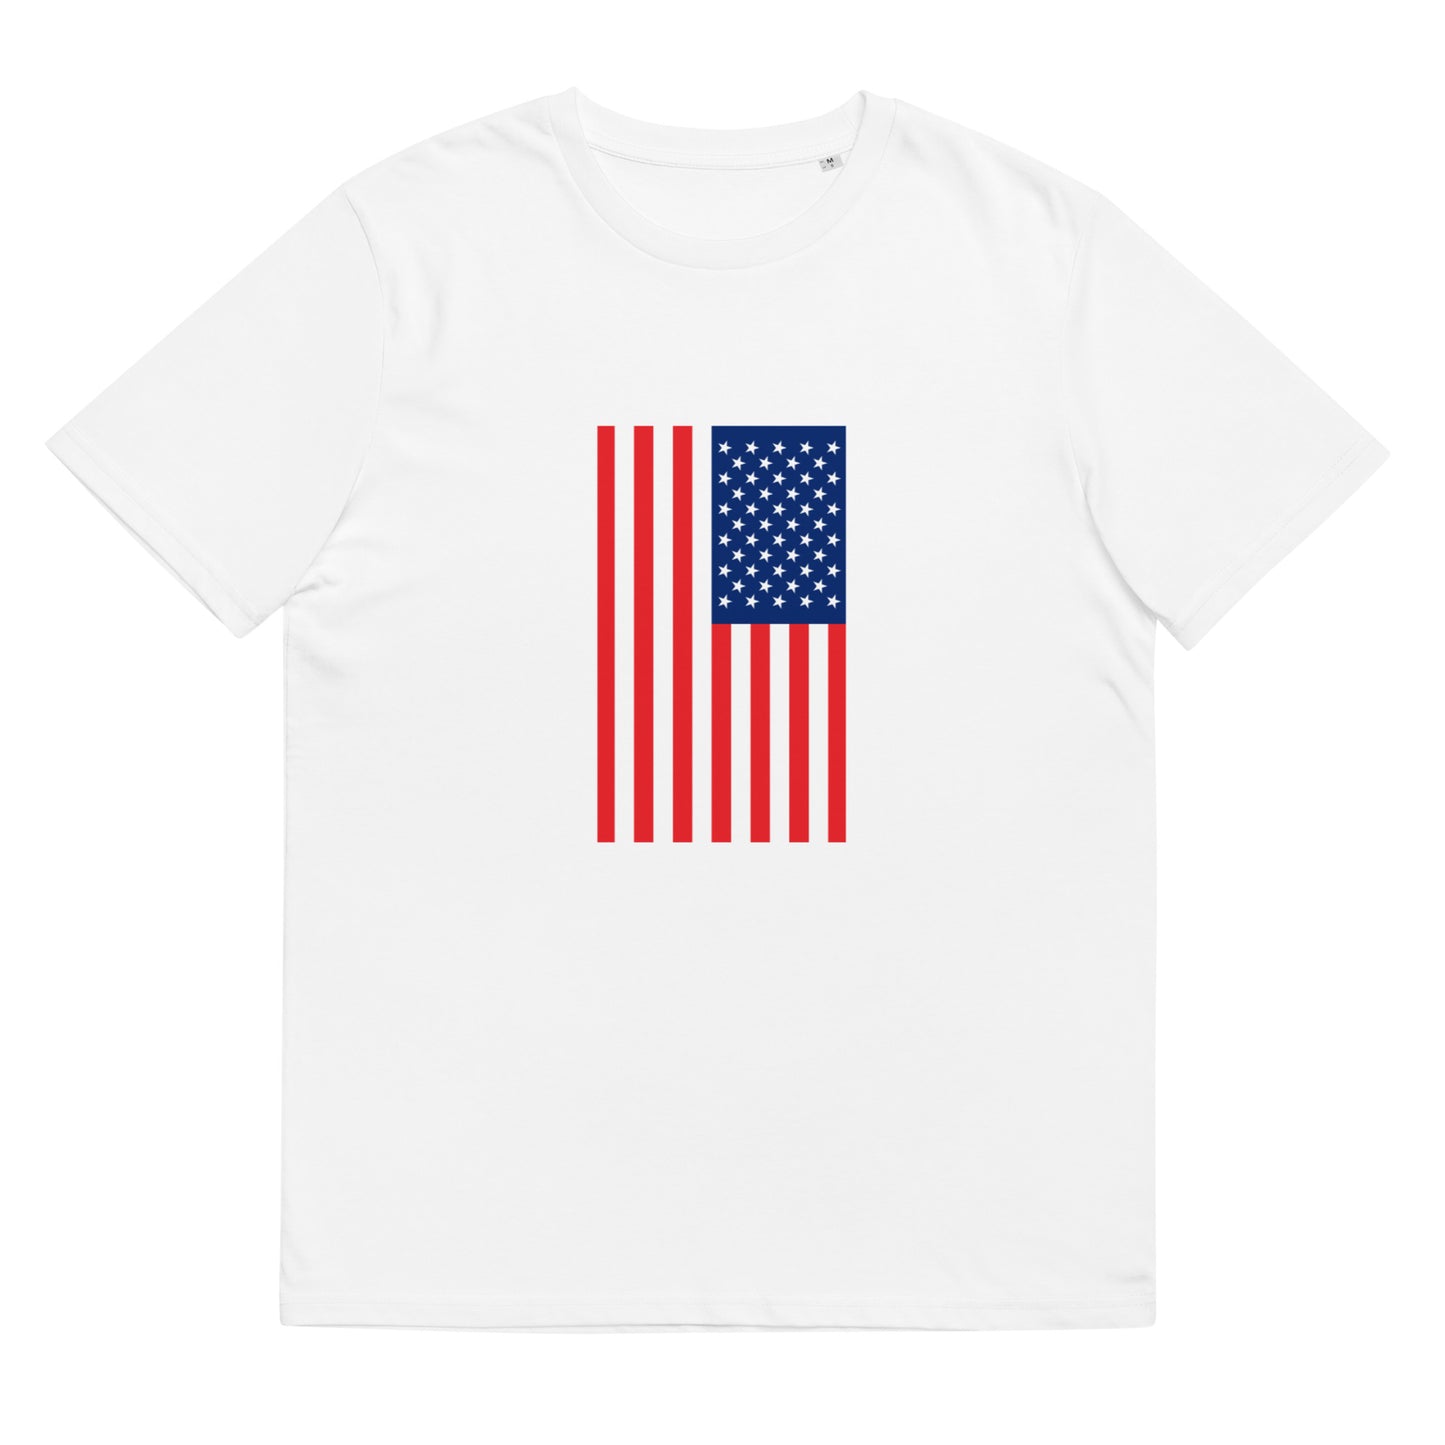 U.S.A Flag - Sustainably Made Men's organic cotton t-shirt